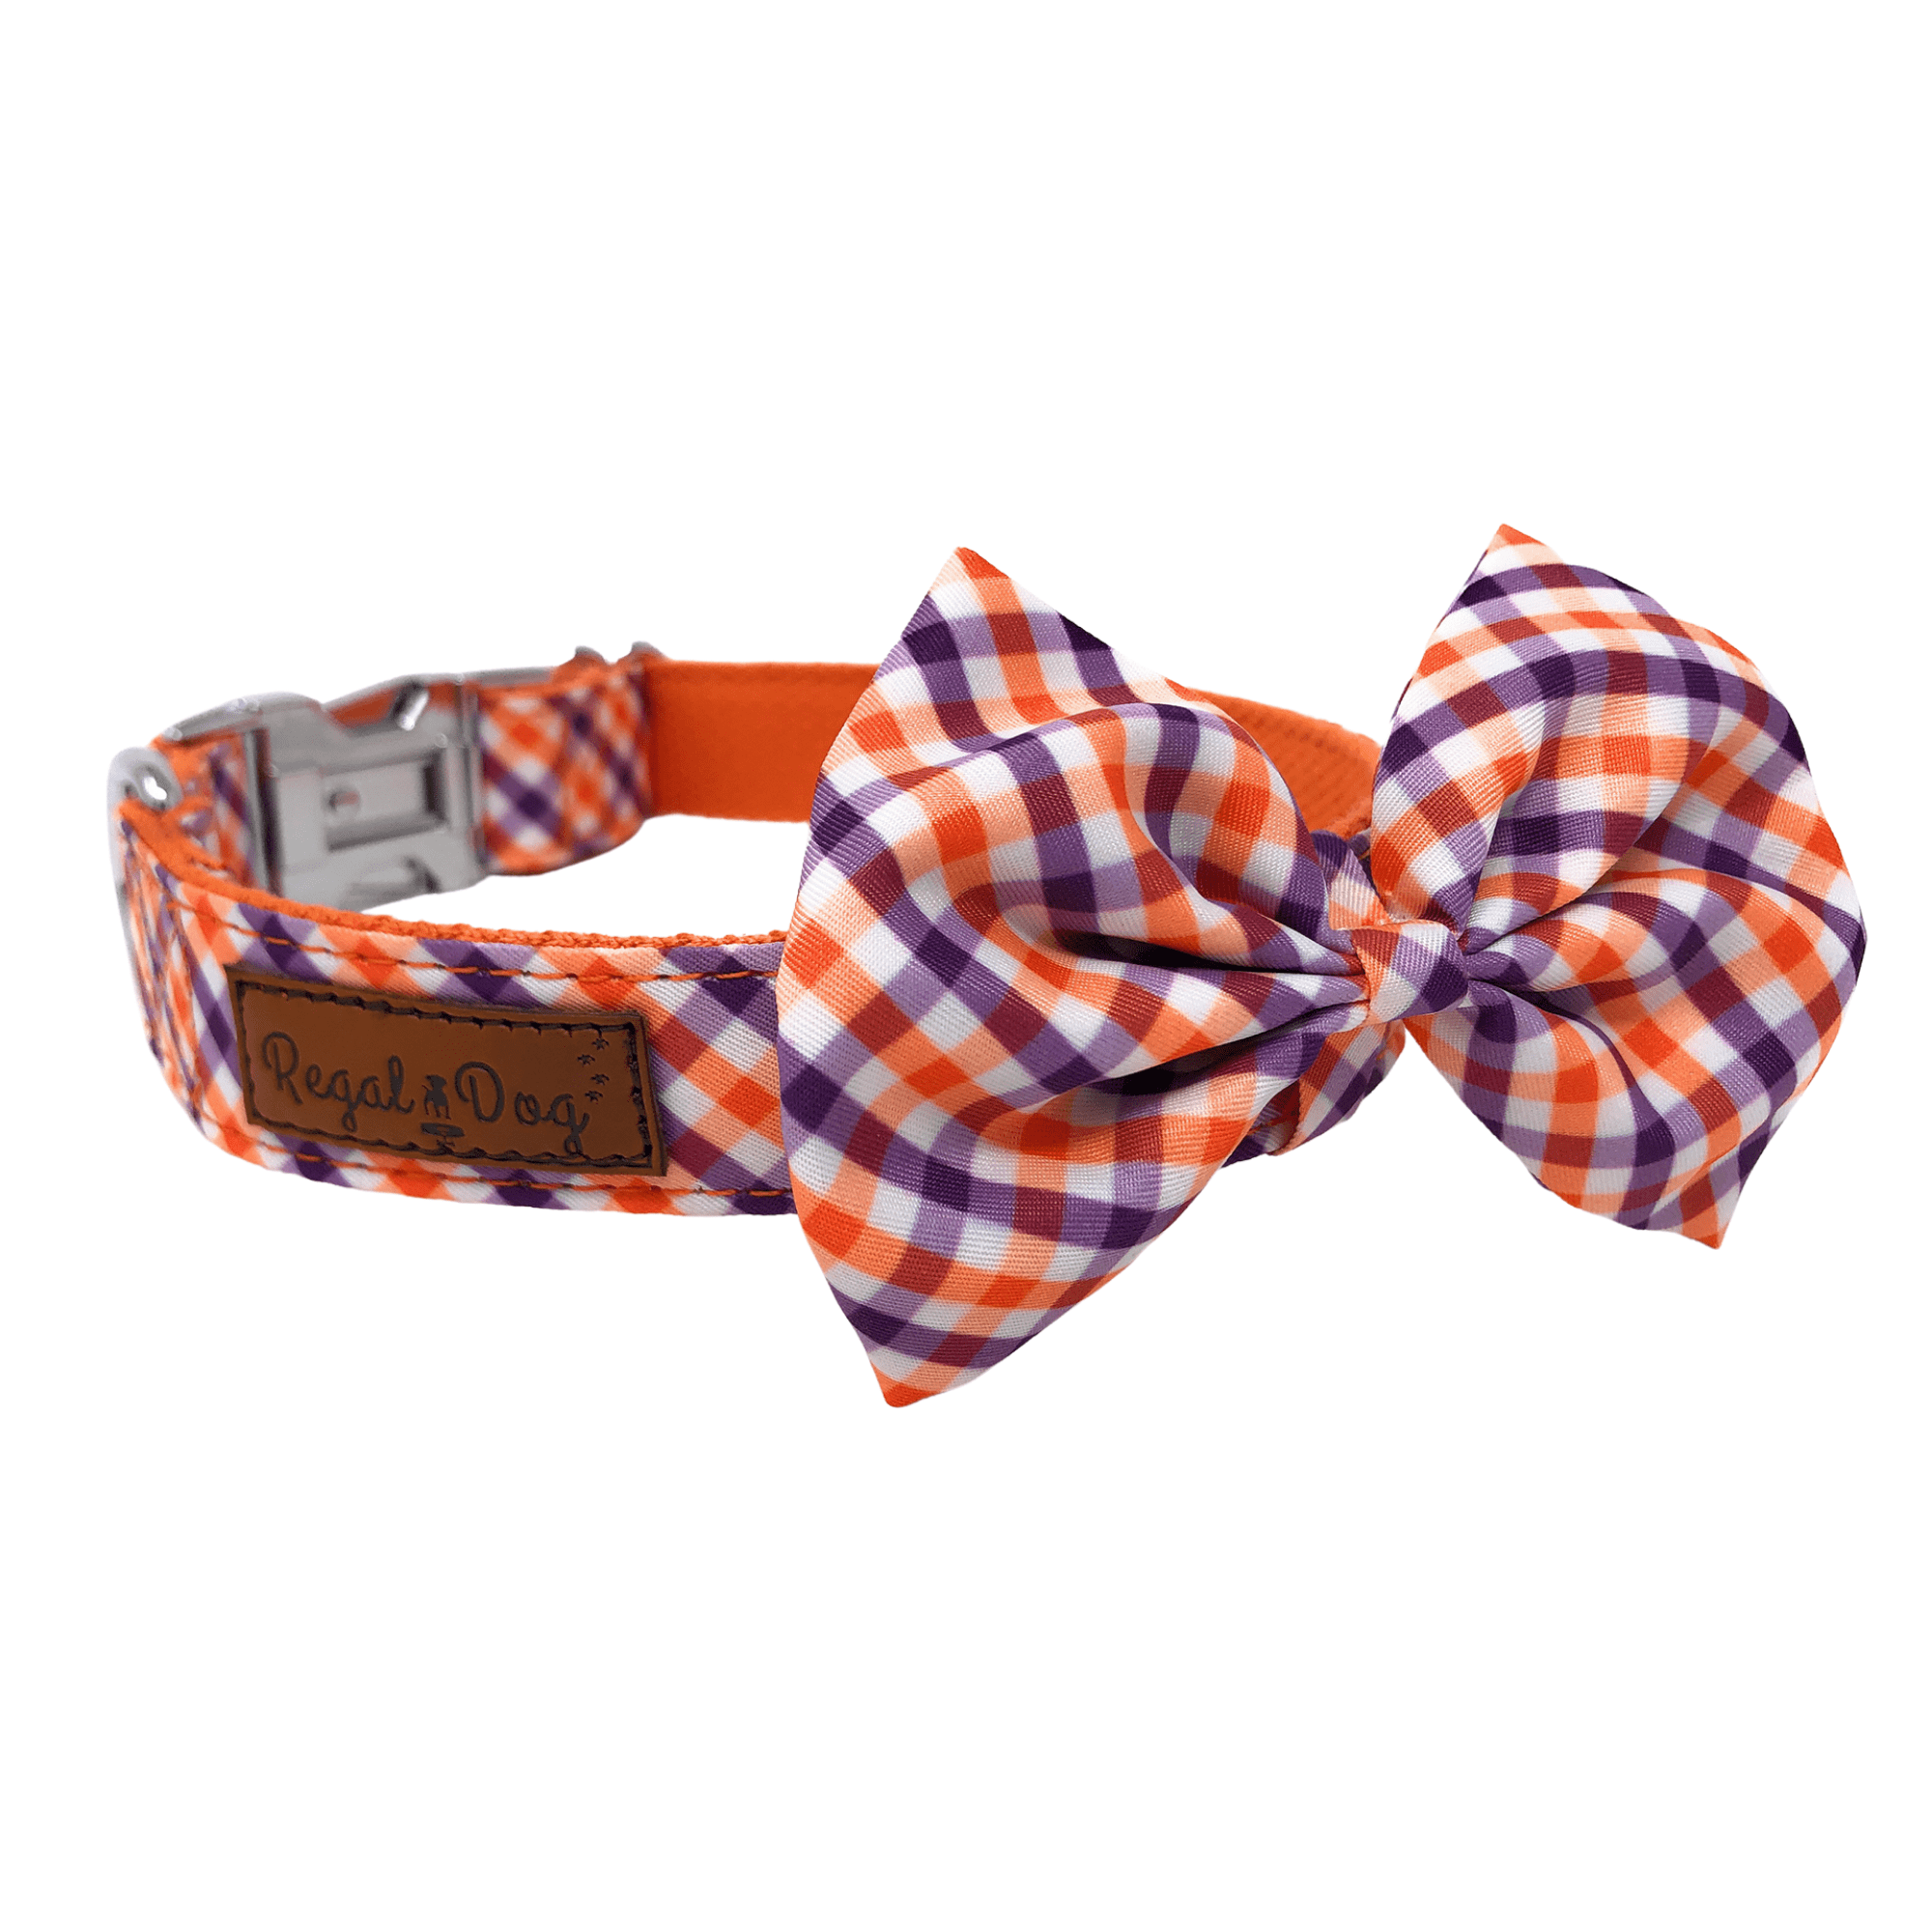 Watercolor Stripe Pet Bowtie Removable Fall Dog Bowtie with Velcro for Collar Dog Bow Tie